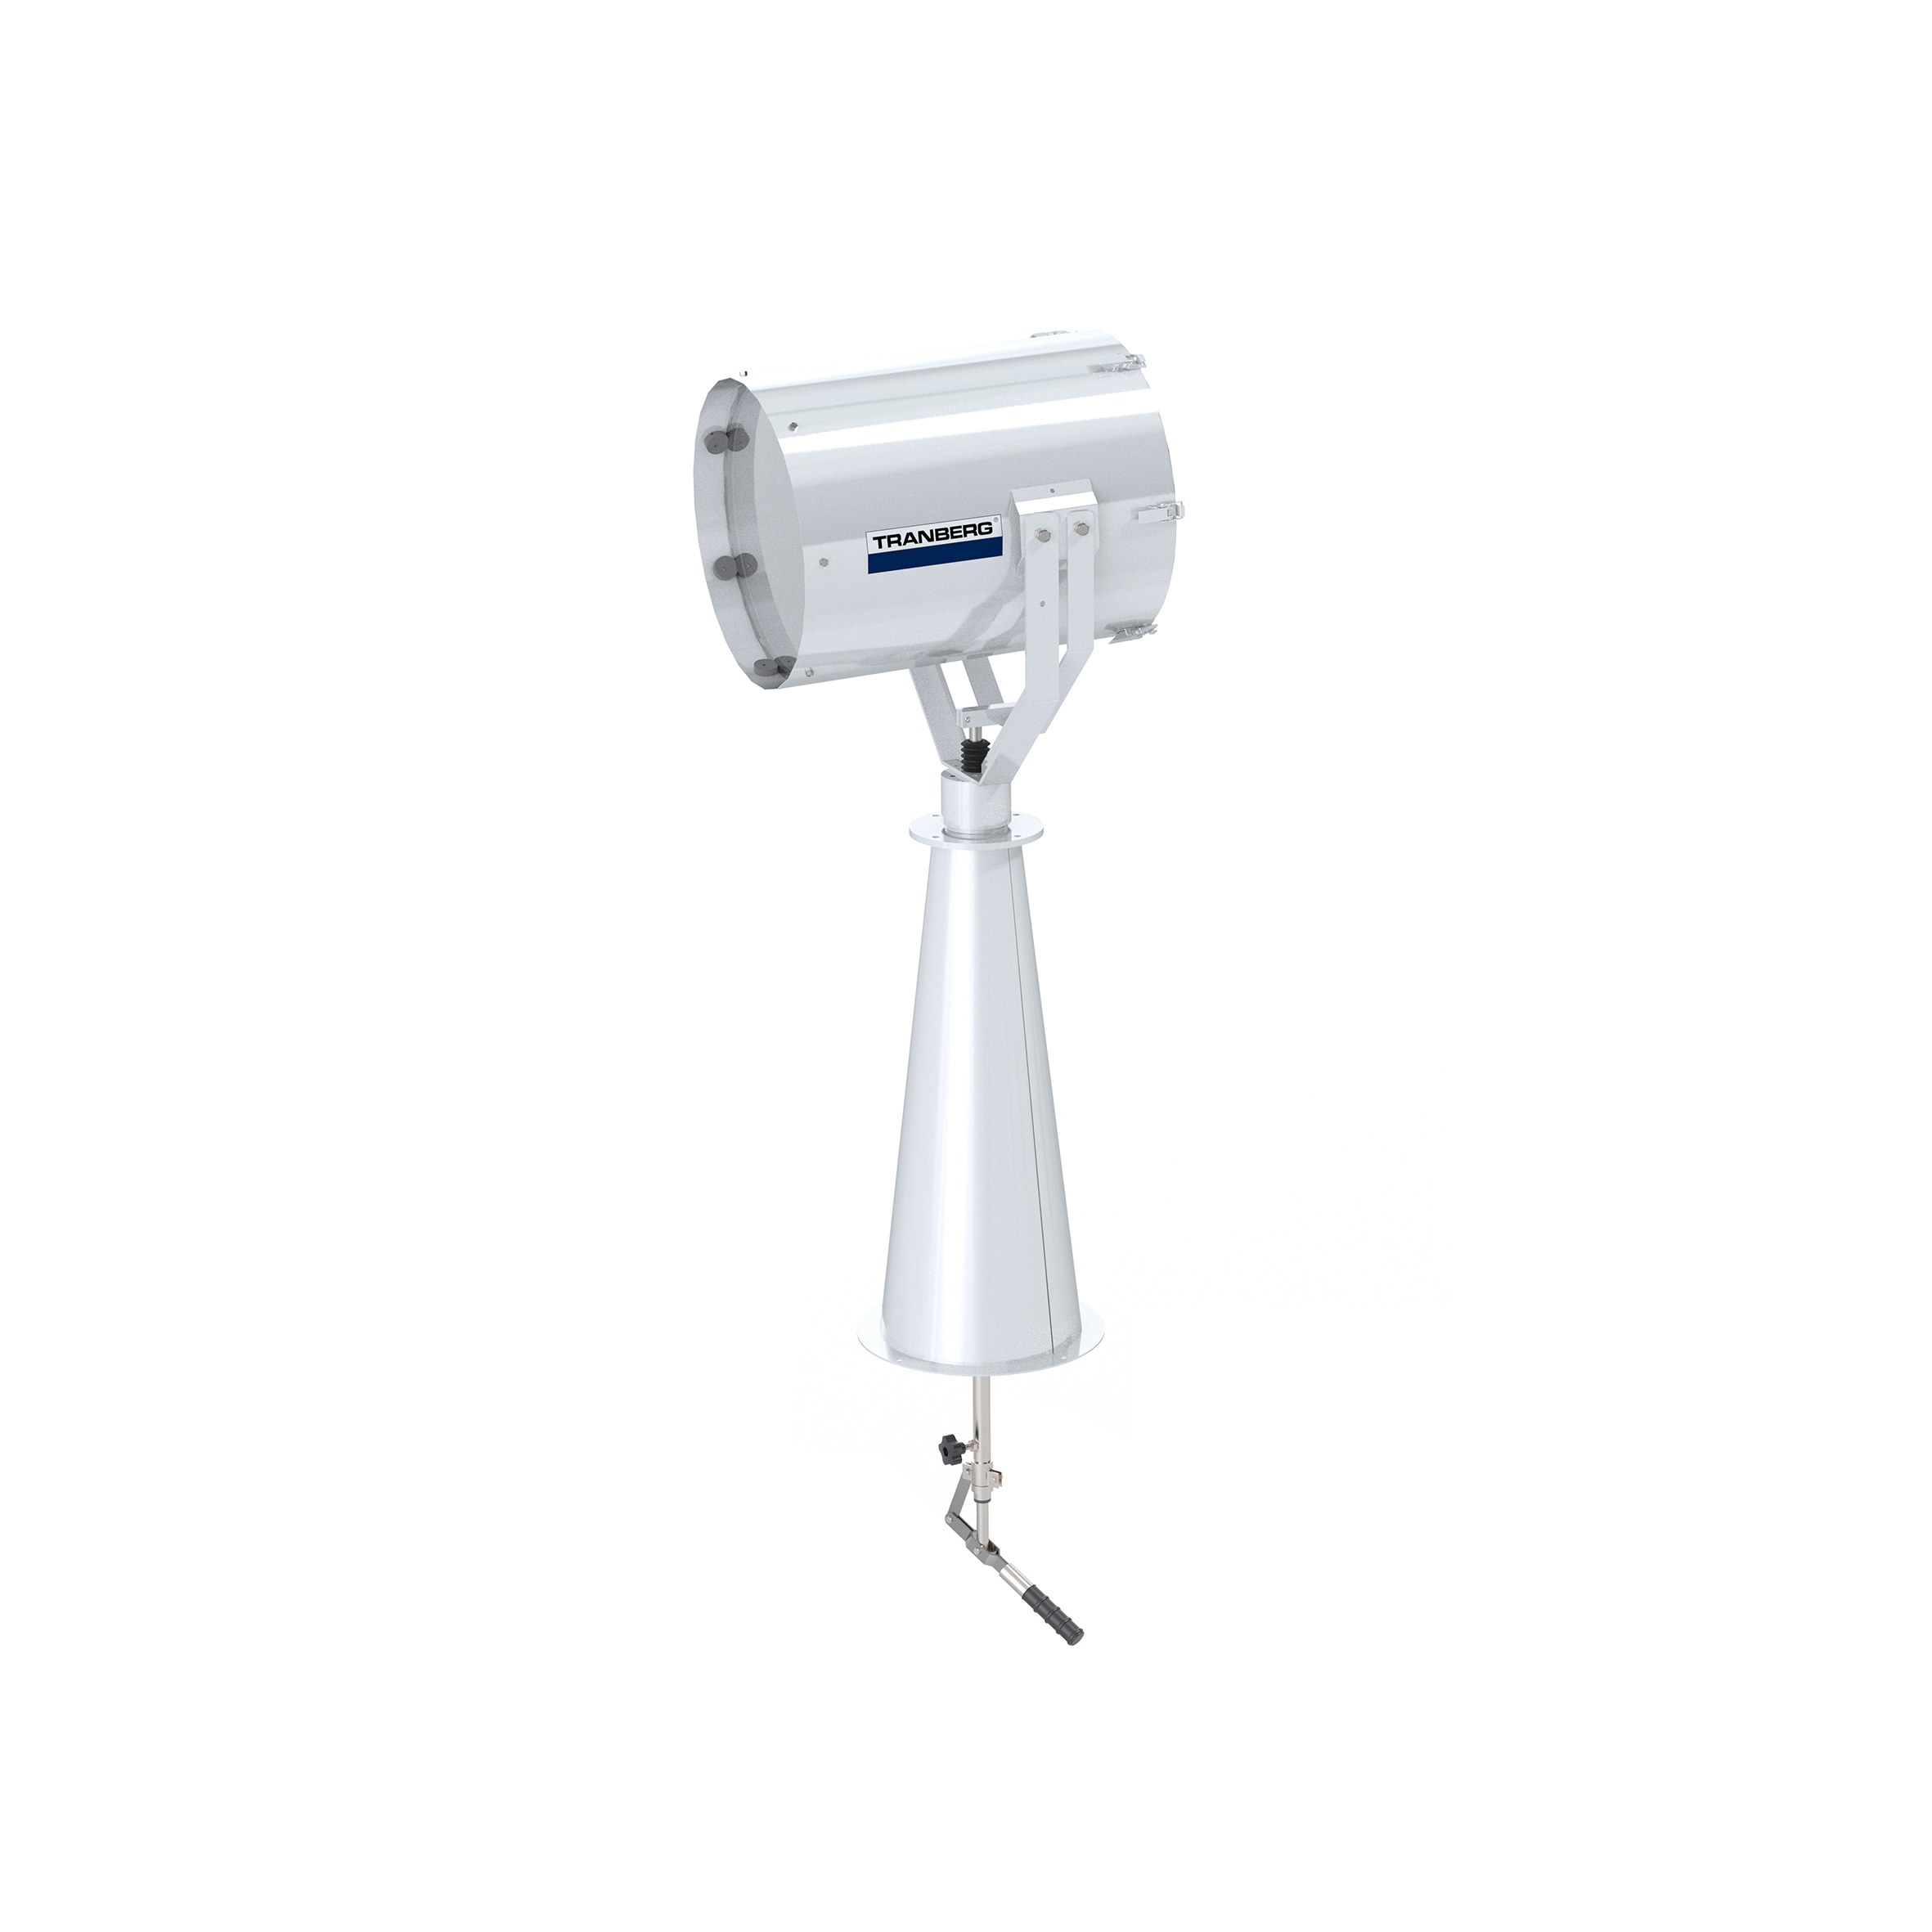 TEF 2630 Searchlight: Halogen 250W bulb incl, 24V, Bridge Controlled, Stainless Steel, W/800 mm pede photo